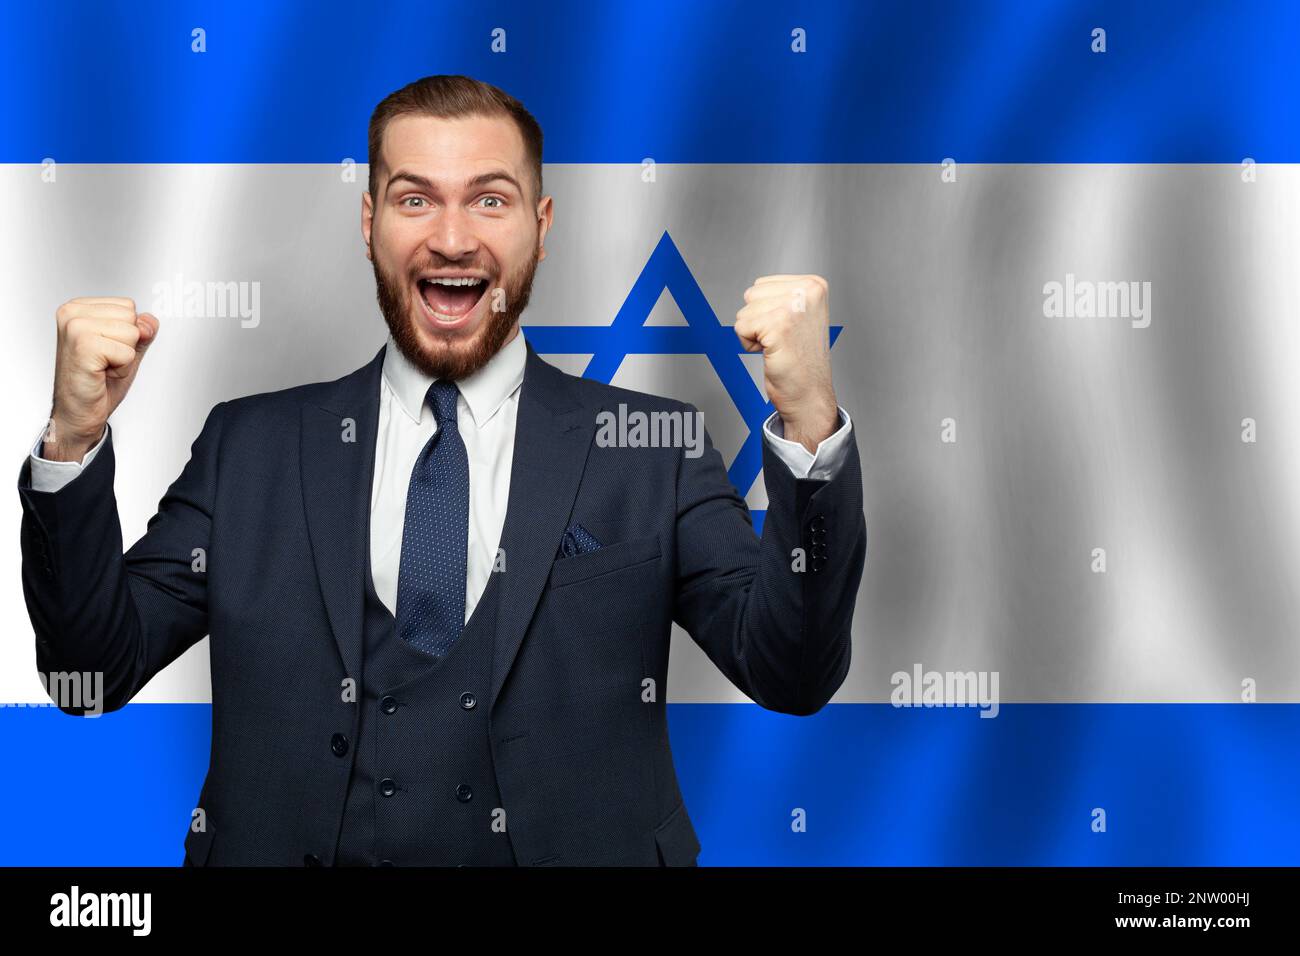 Izraeli happy businessman on the background of flag of Izrael Business, education, degree and citizenship concept Stock Photo